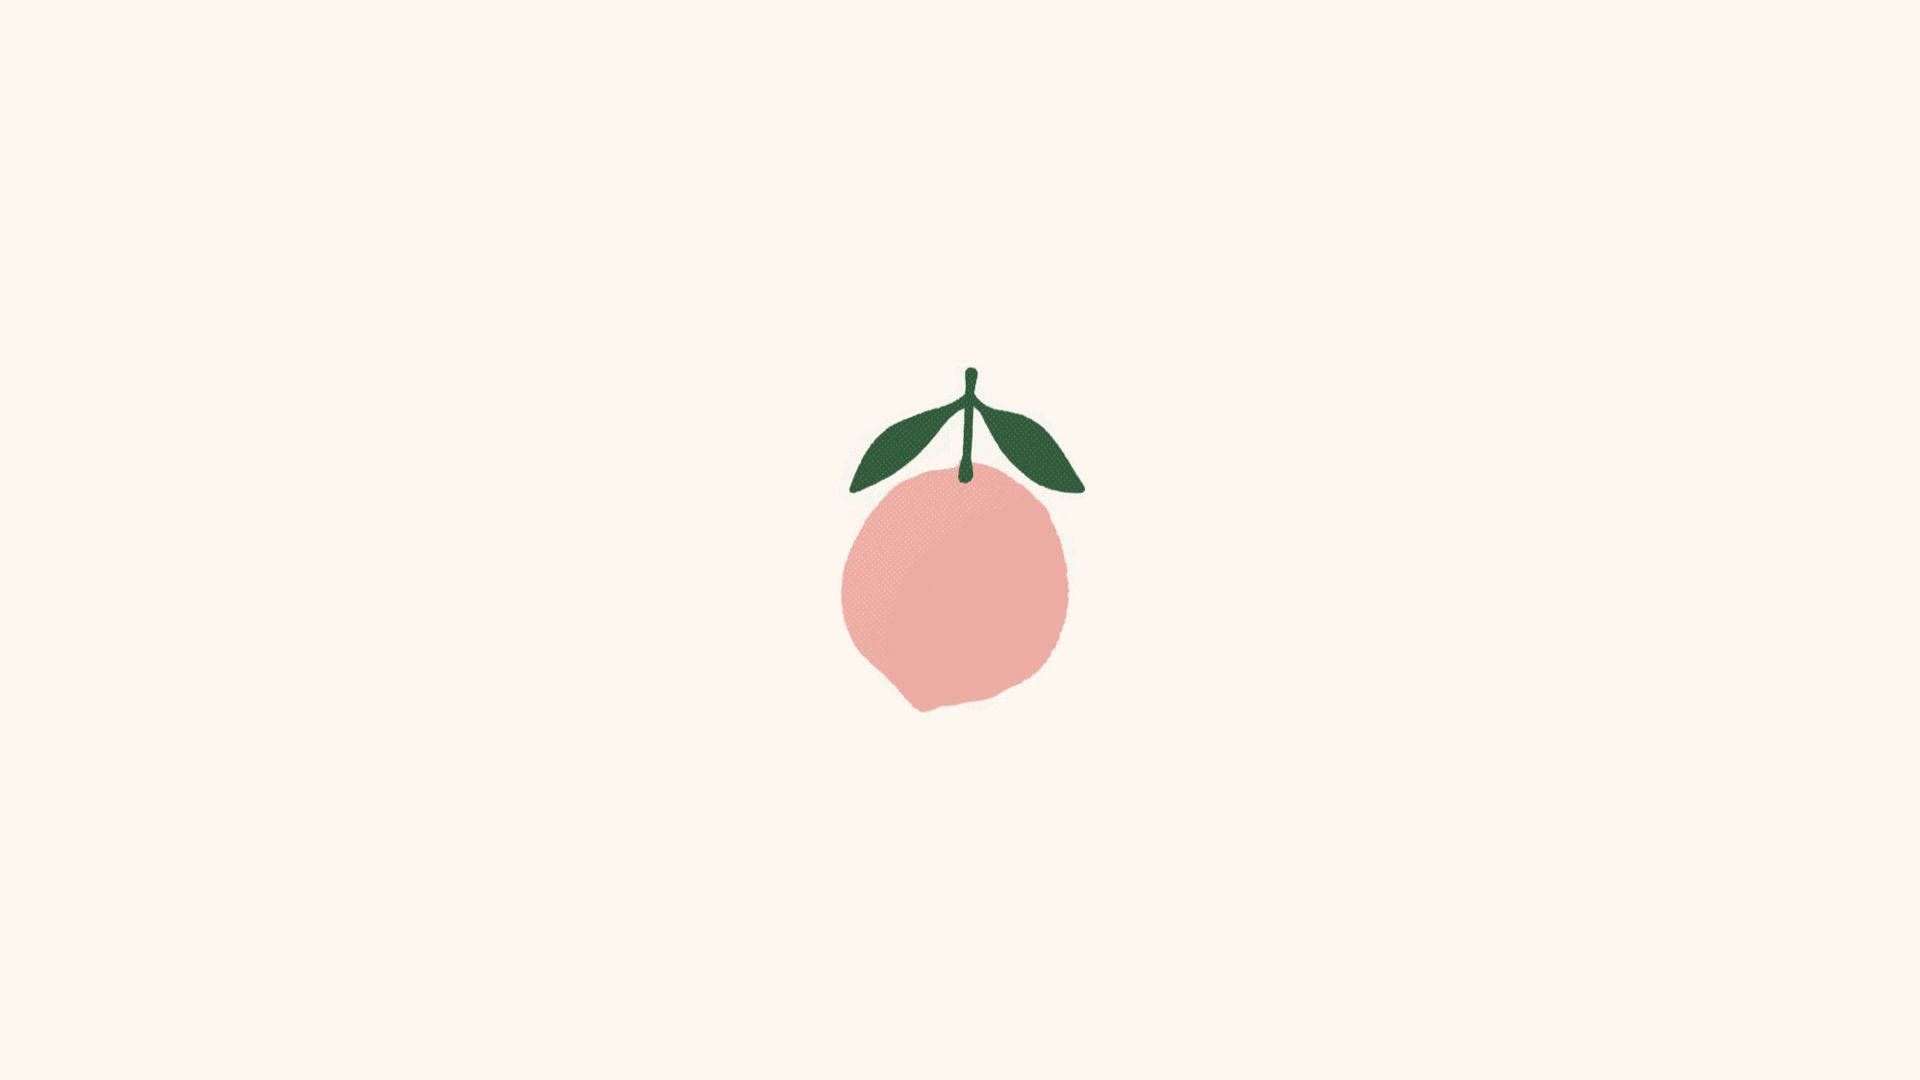 A pink lemon with green leaves on a white background - Peach, fruit